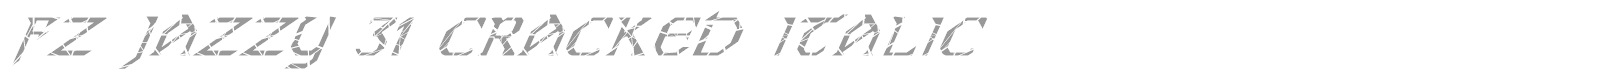 FZ JAZZY 31 CRACKED ITALIC font preview